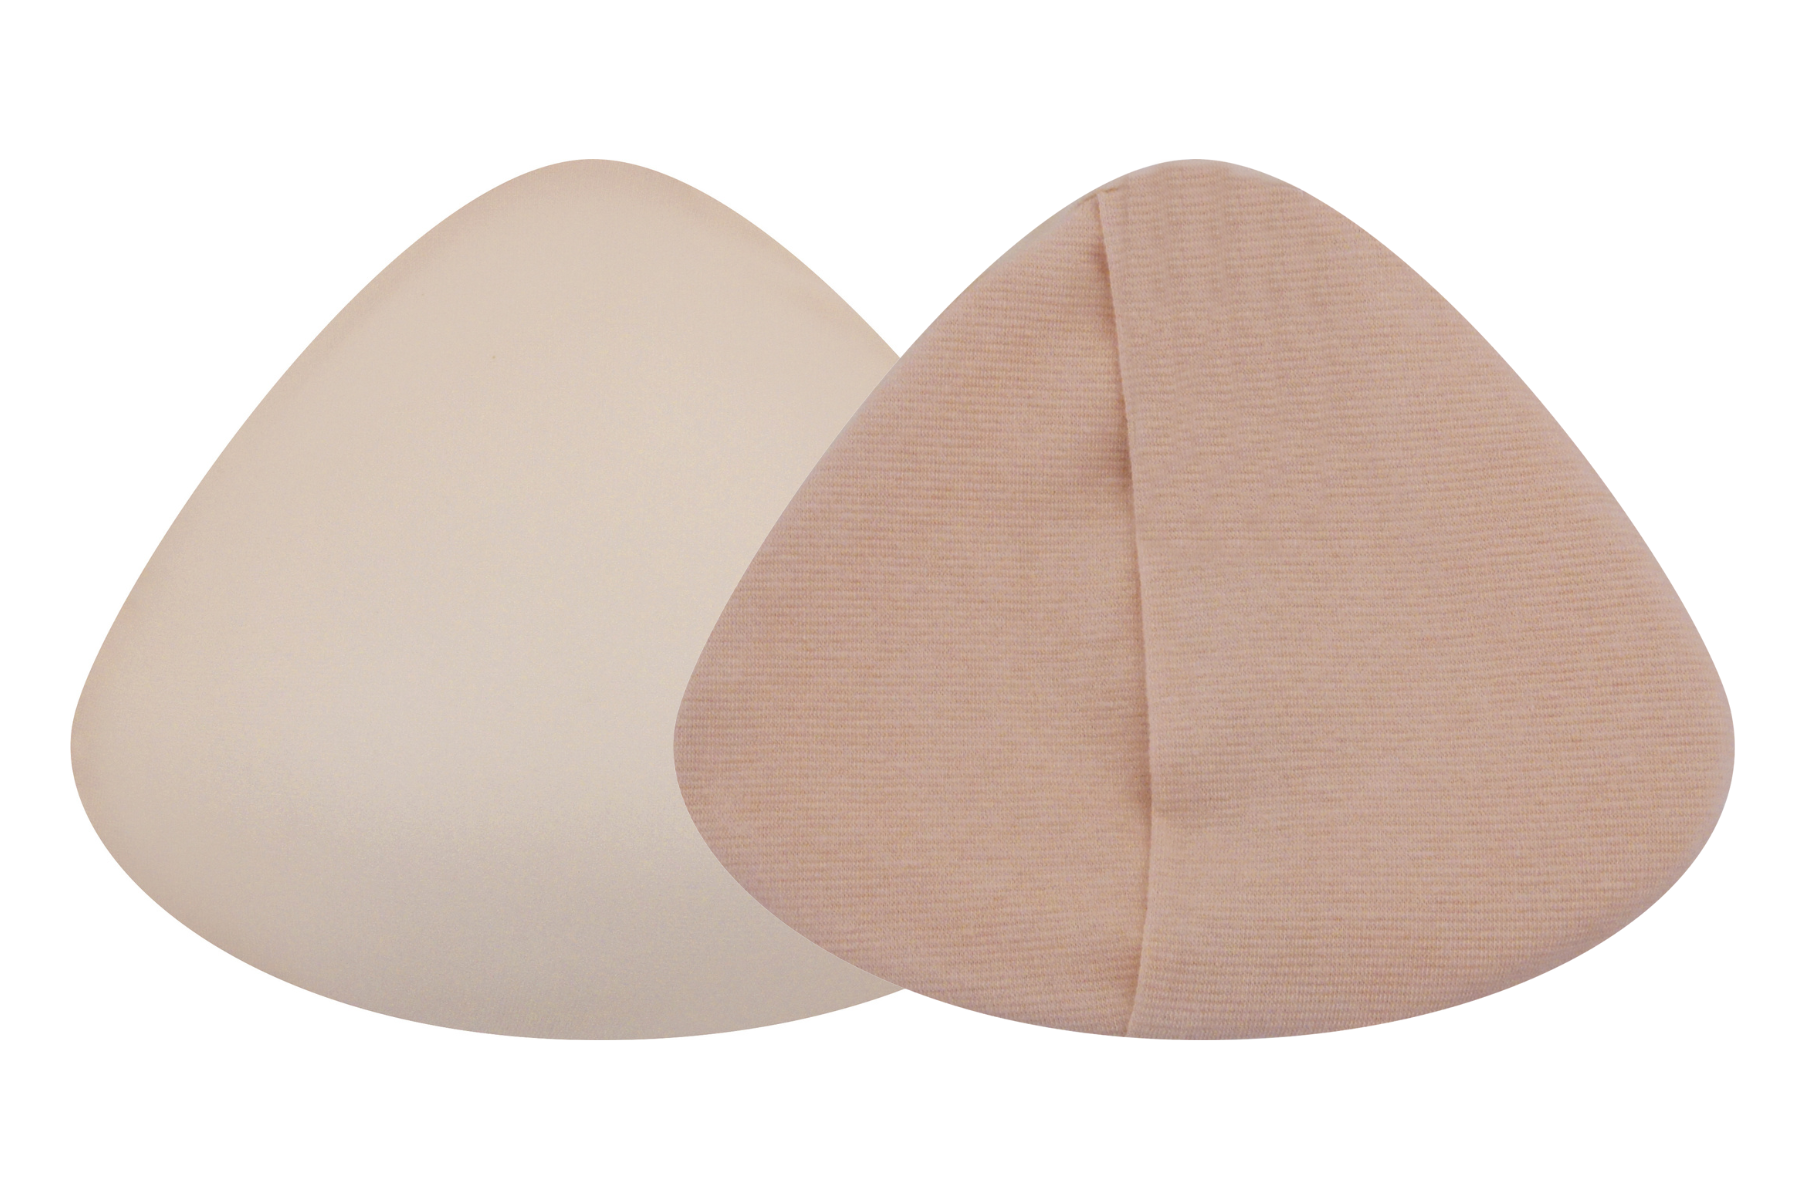 NEARLY ME Standard Weight Semi-Full Triangle Breast Form